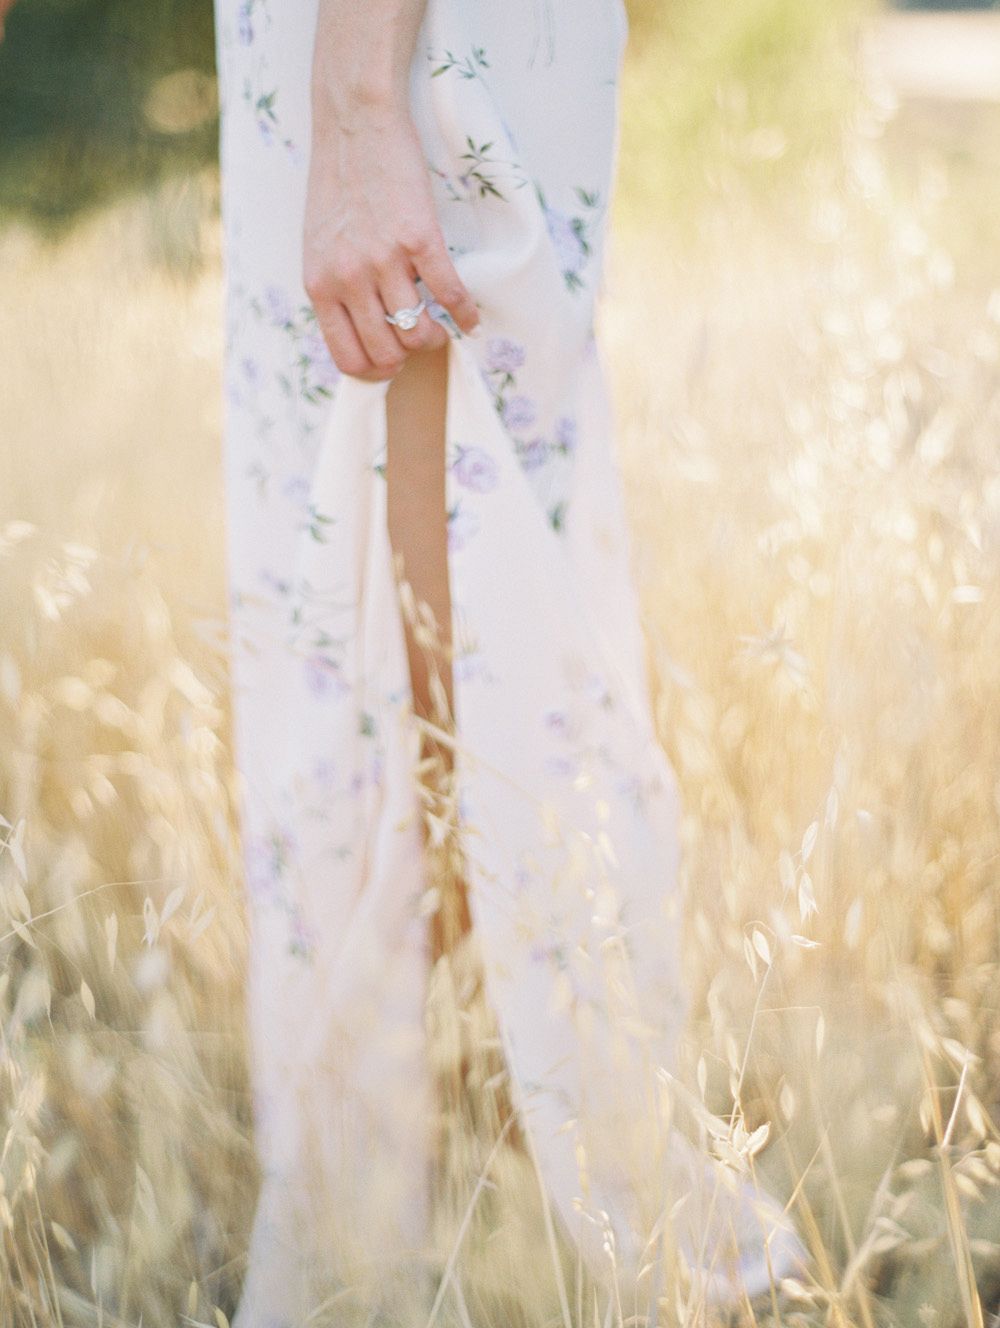 Bethany and Enbo's Southern California Engagement